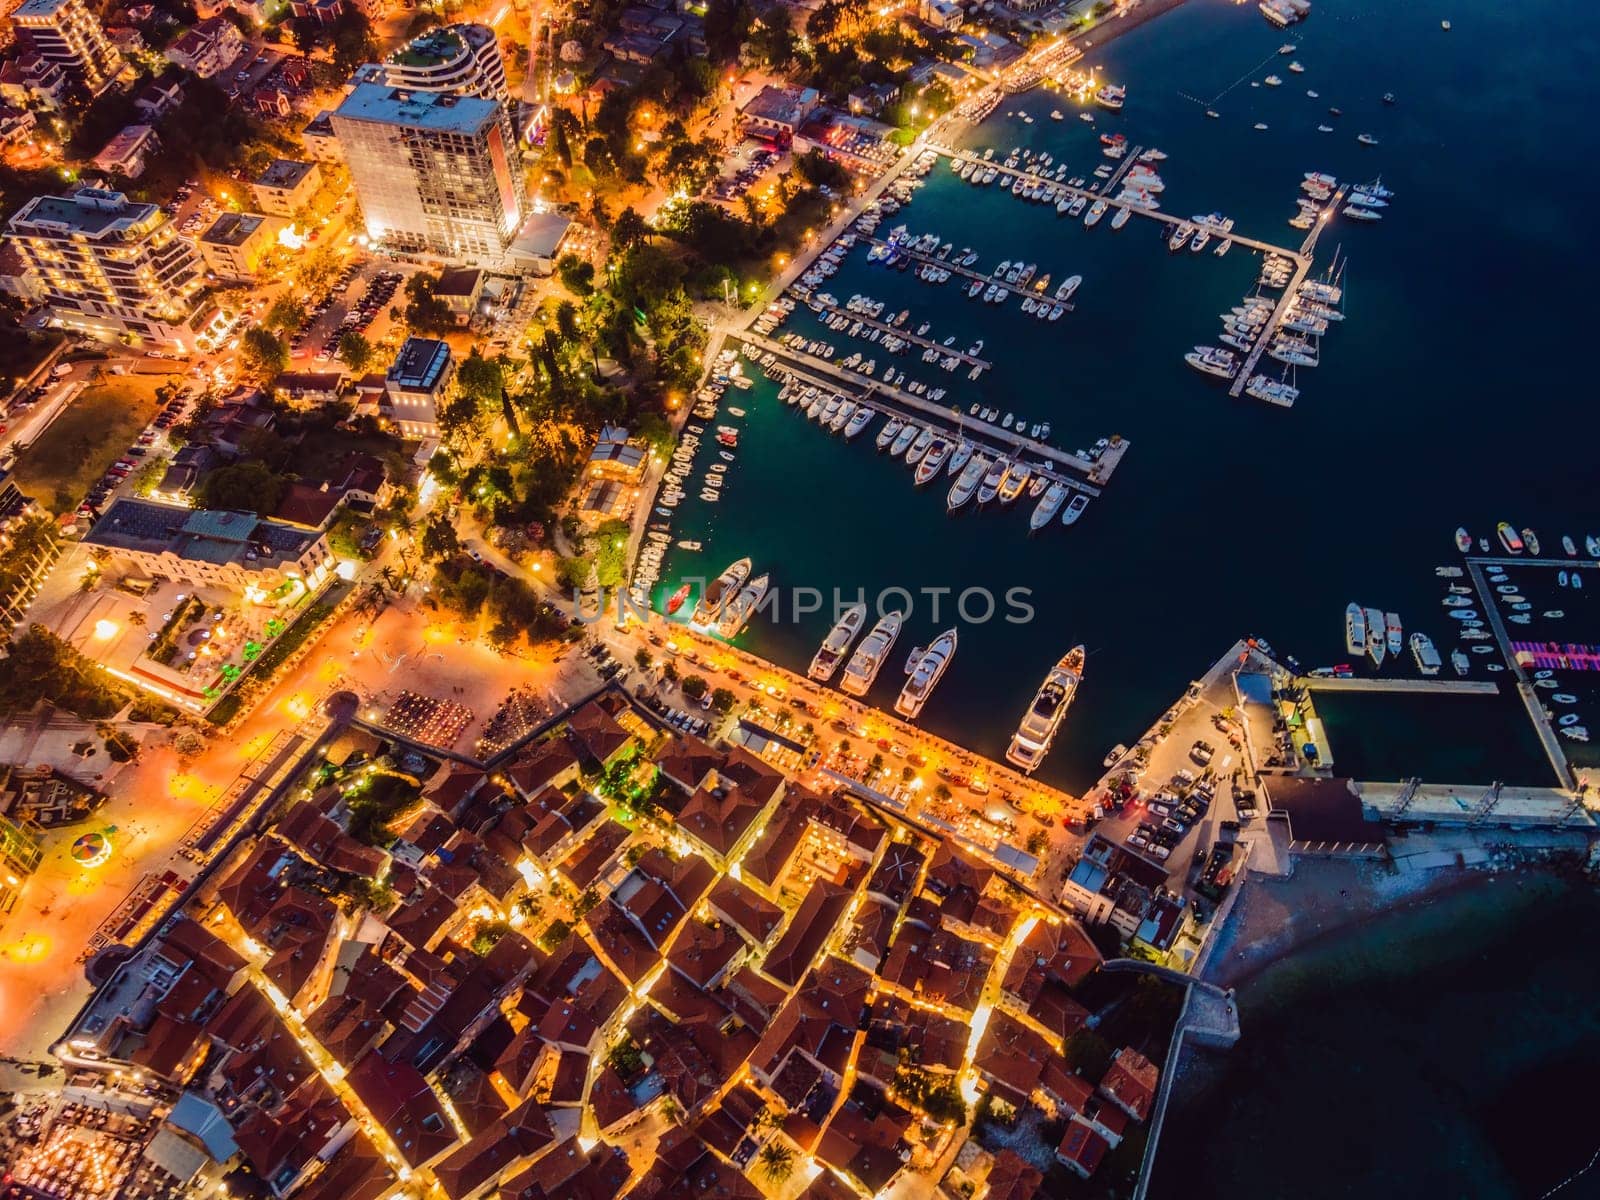 Budva city lights from Montenegro seen from above. Night view. Drone old town Budva at night.